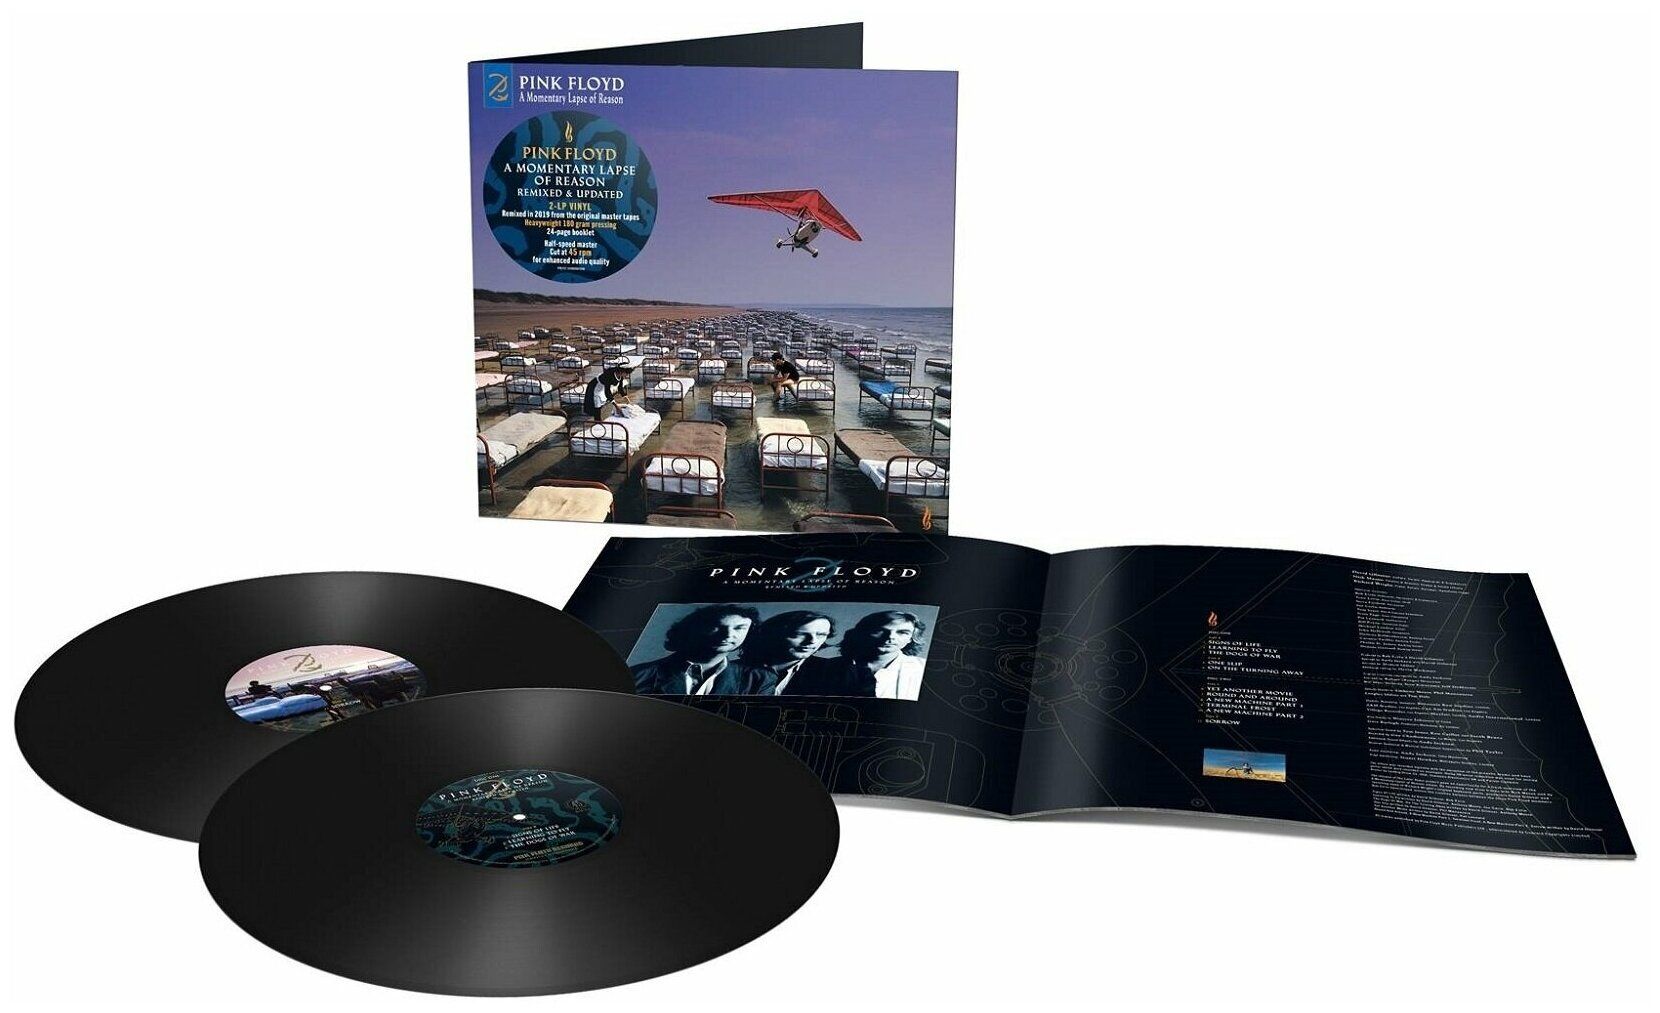 Виниловая пластинка Pink Floyd, A Momentary Lapse Of Reason (Remixed & Updated) (0190295079208) pink floyd the later years 1987 2019 [vinyl]